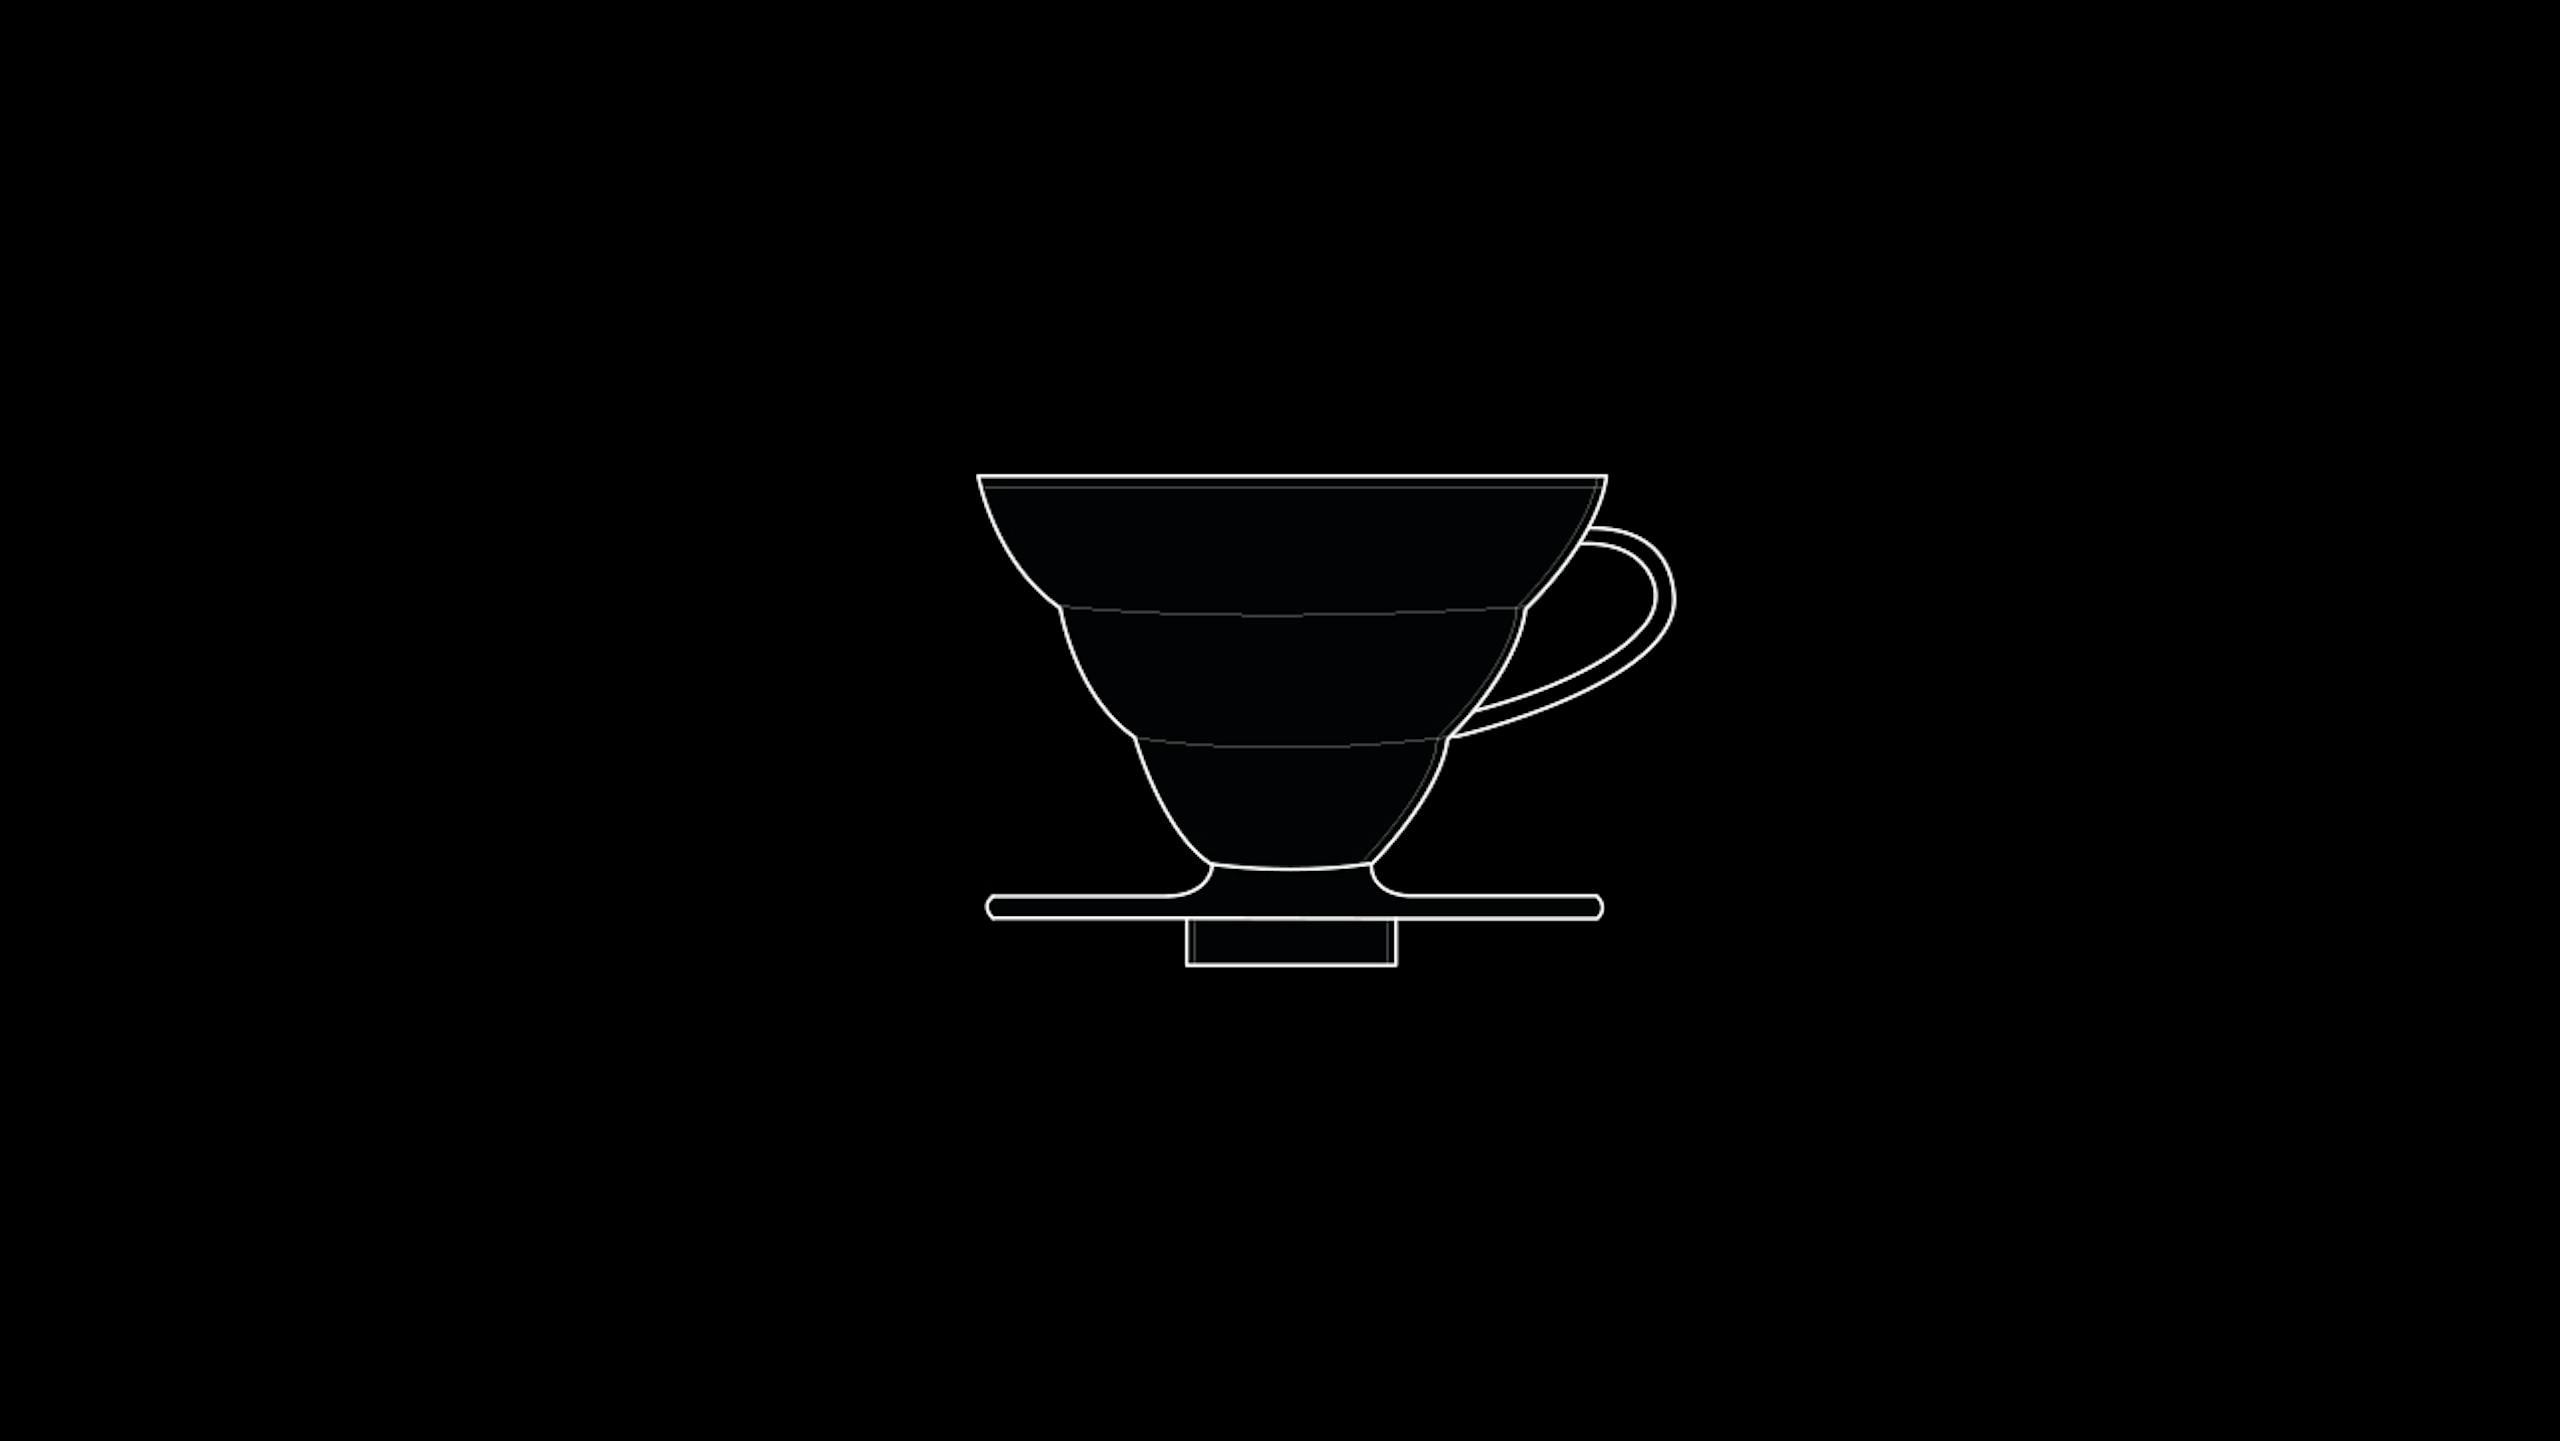 The story of Hario, the designer of the V60 dripper, brings together chemistry, glass products, and coffee. founded in Tokyo in 1921, started by producing and selling physical and chemical-use glass products. 